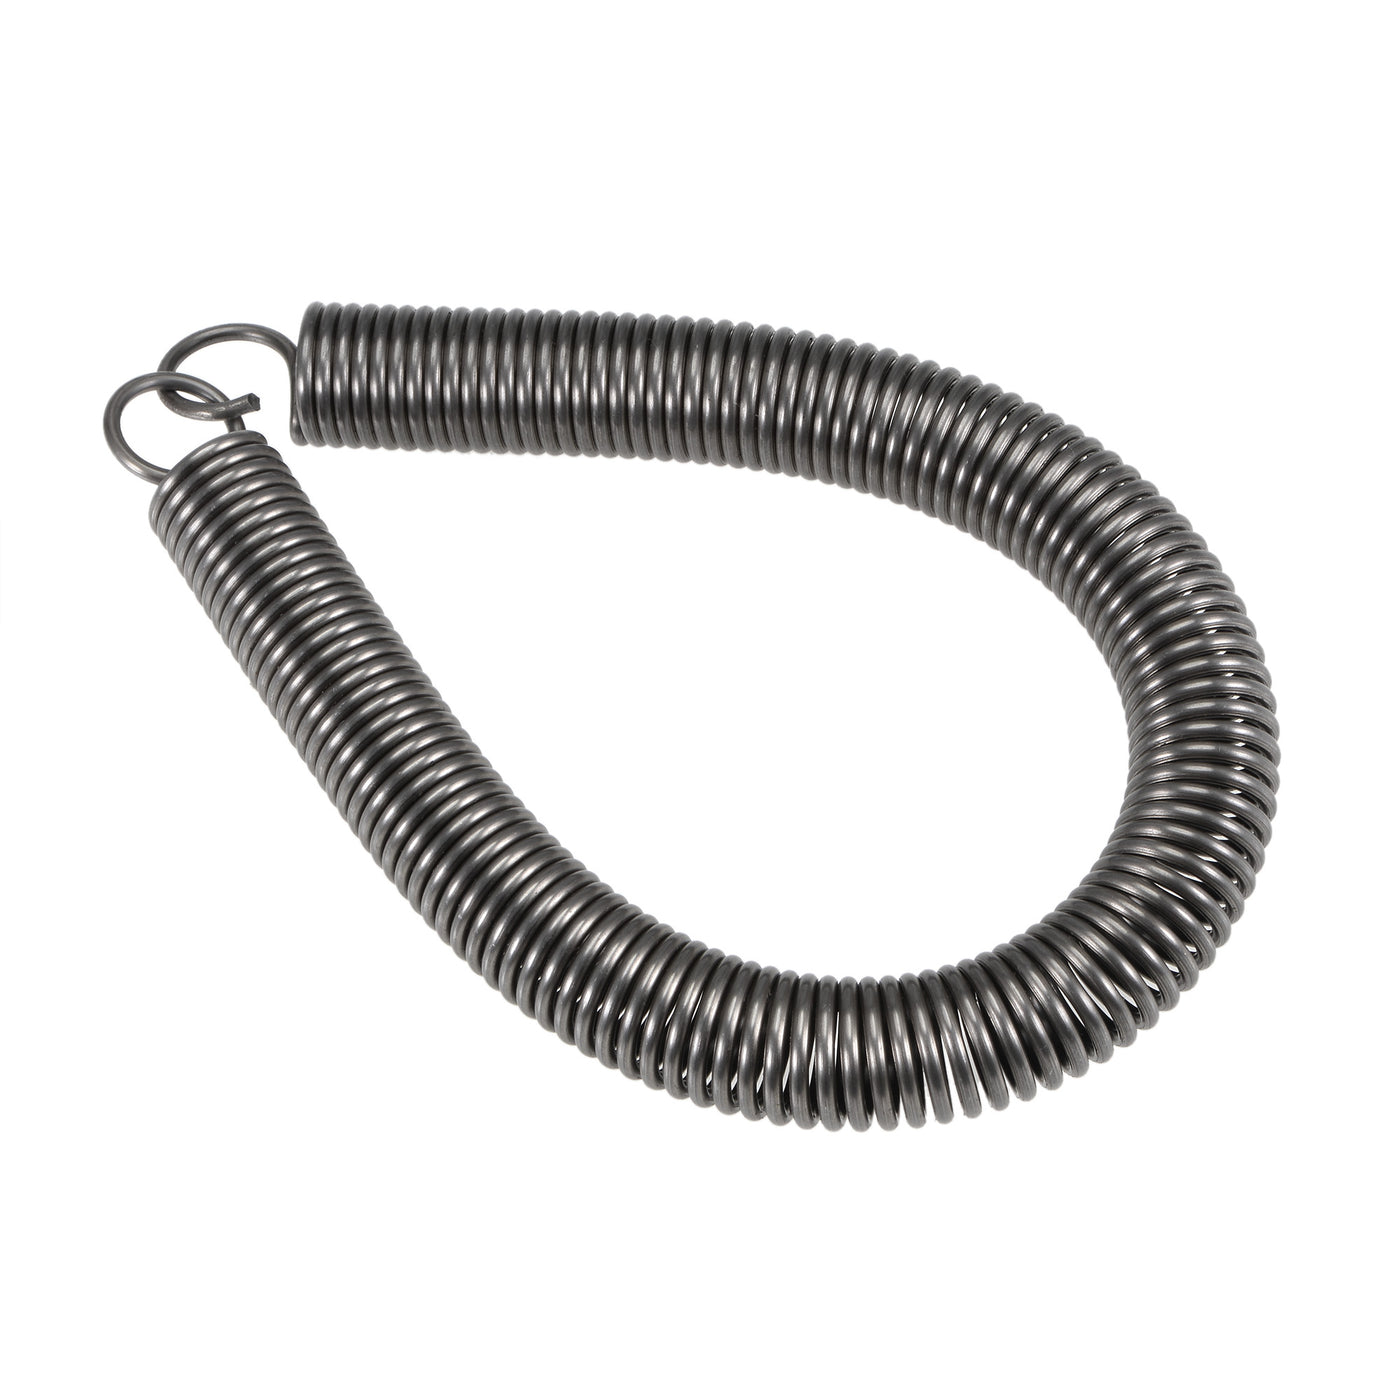 Uxcell Uxcell 2mmx16mmx280mm Extended Compression Spring ,33Lbs Load Capacity,Grey 2pcs